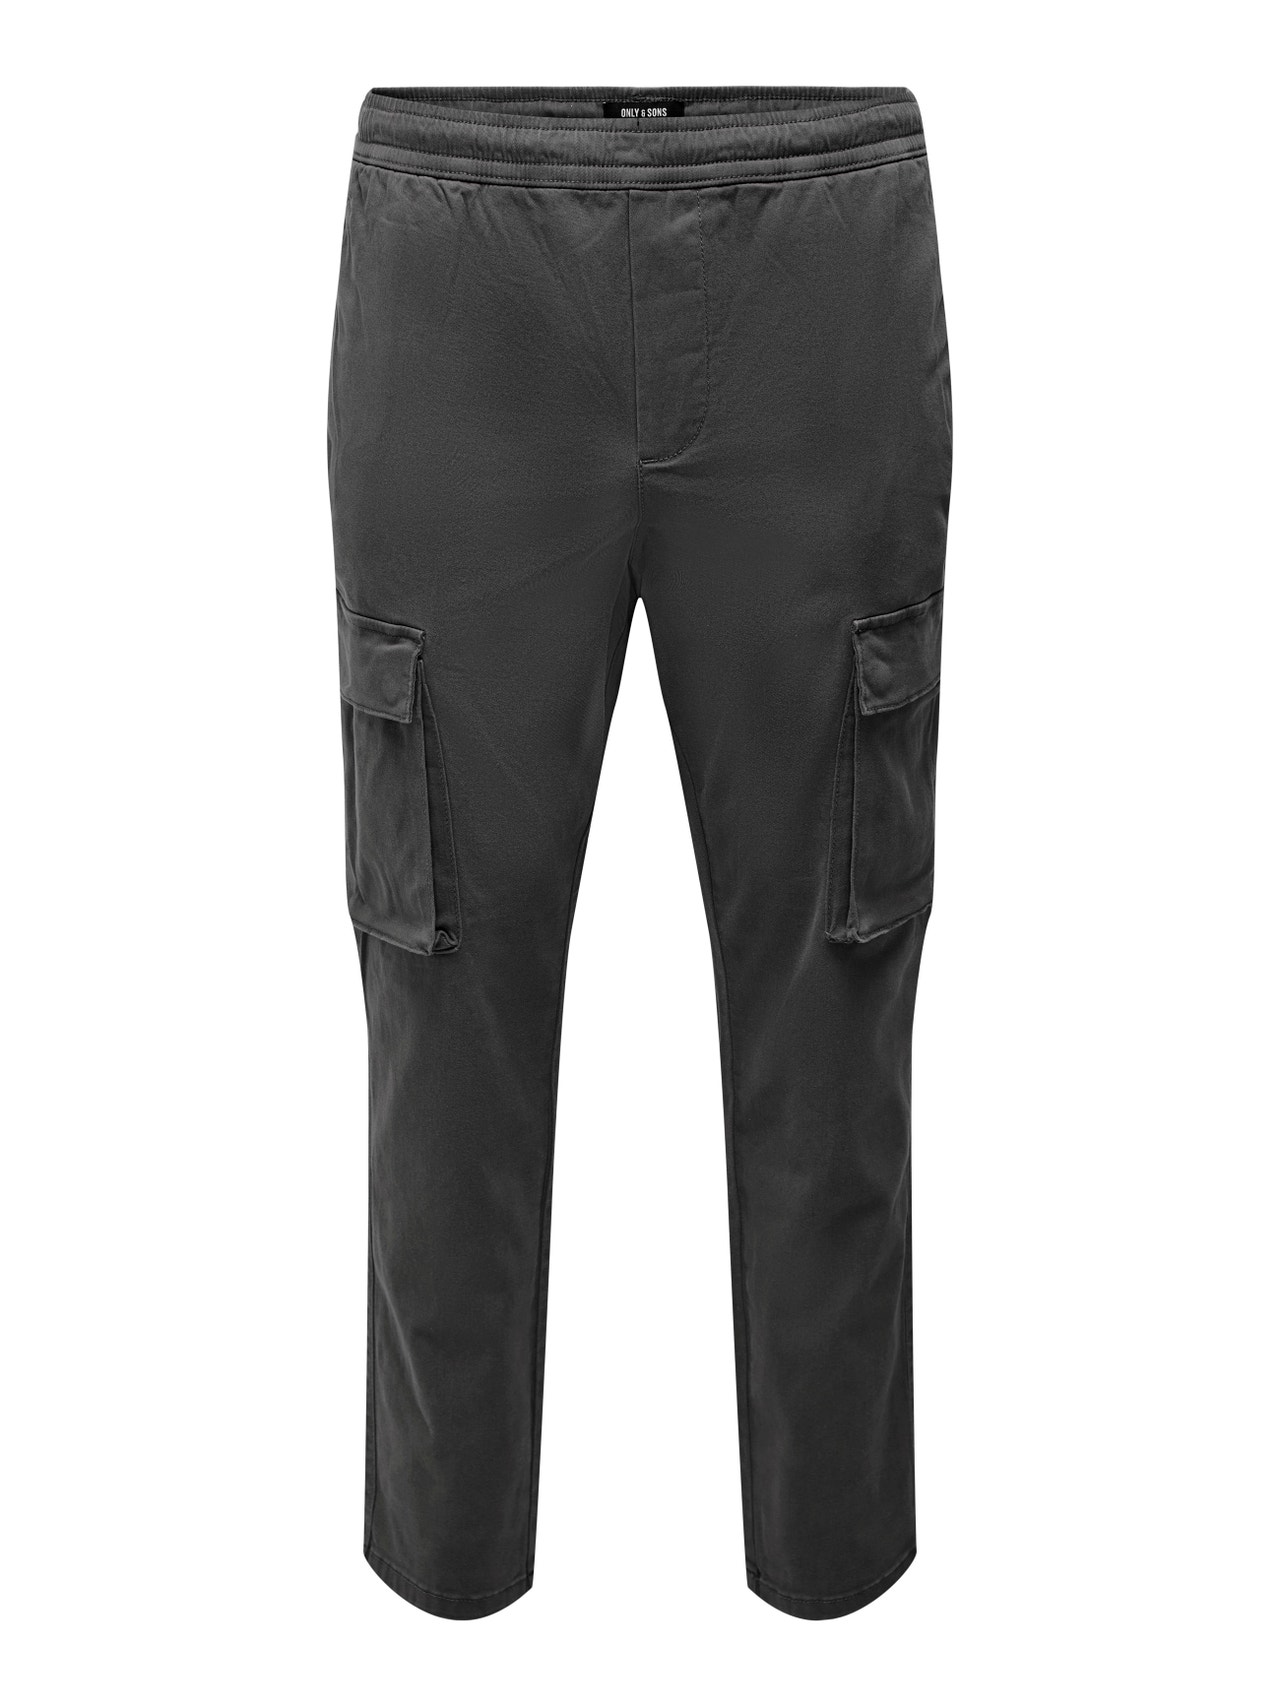 ONLY & SONS ONSCAM LINUS CARGO PANT PK 2366 -Grey Pinstripe - 22022366